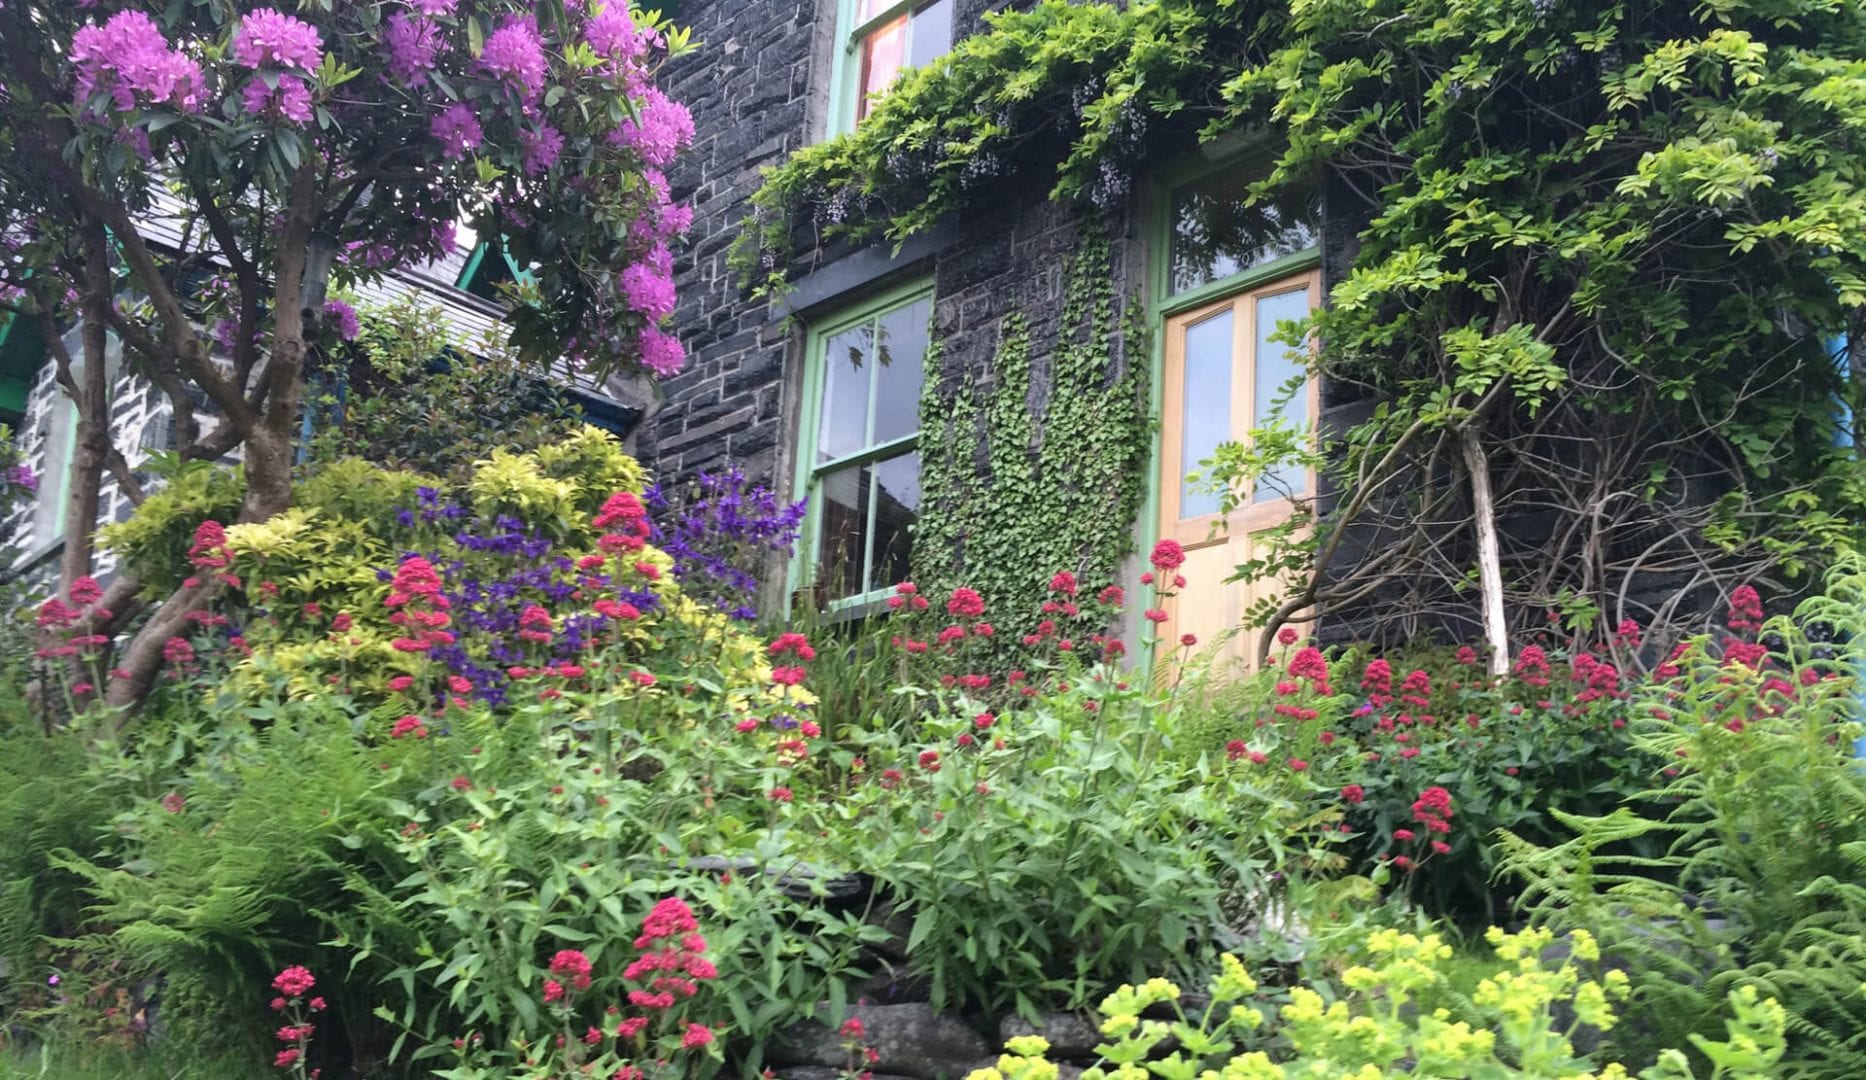 The exterior of corris hostel filled with flowers